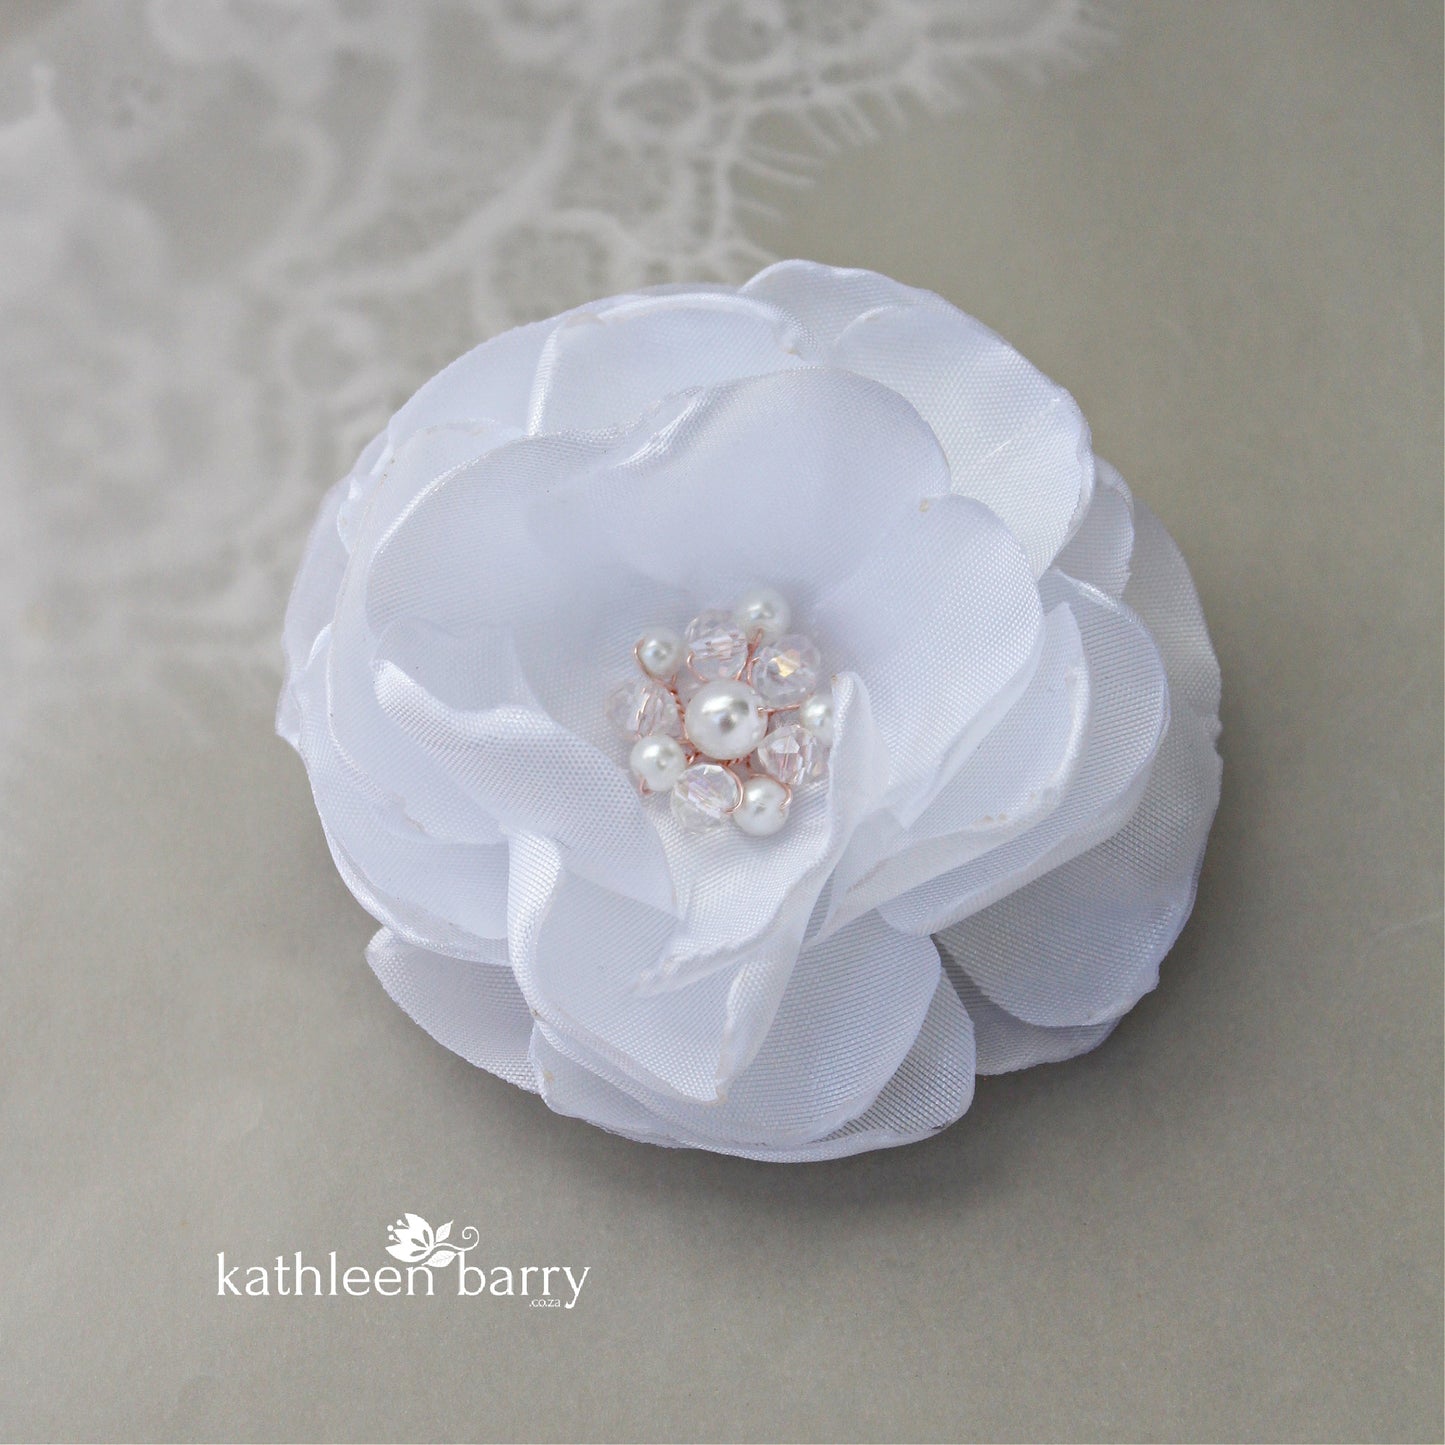 Taffeta Hair flower white, ivory or nude/blush - silver, gold or rose gold with dual purpose, hair clip/ brooch